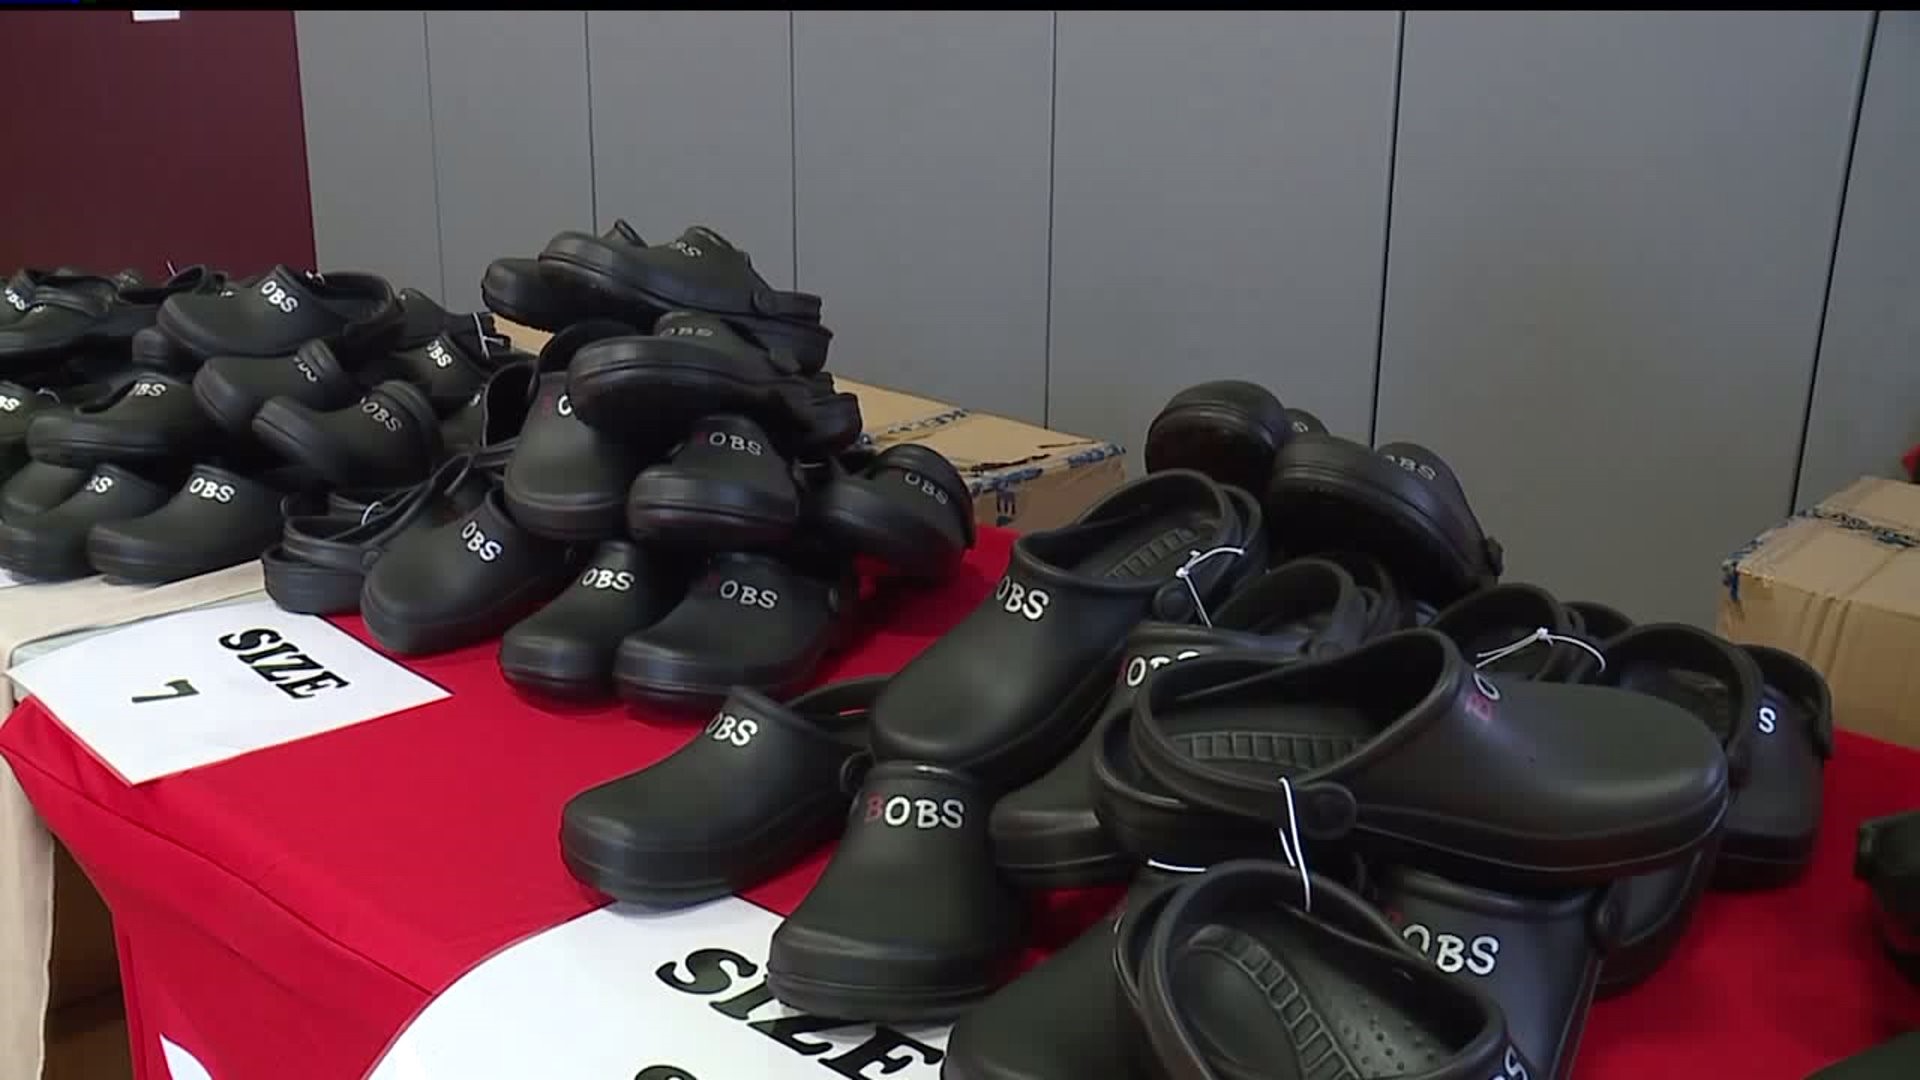 Skechers and Super Shoes donate shoes to kids in need